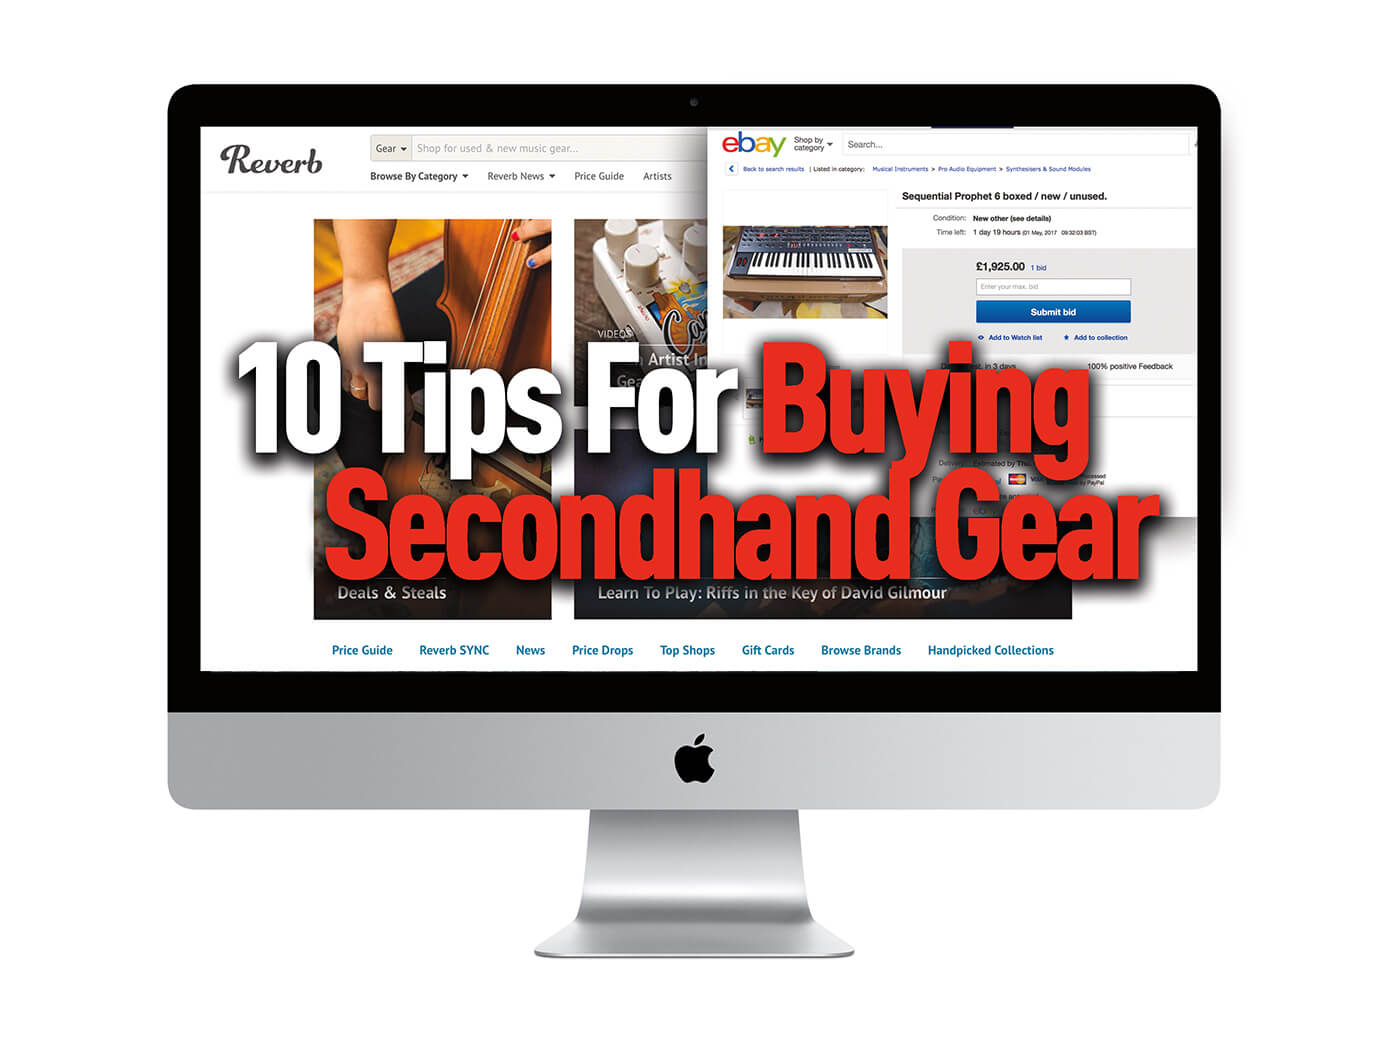 10 Tips for buying secondhand gear iMac